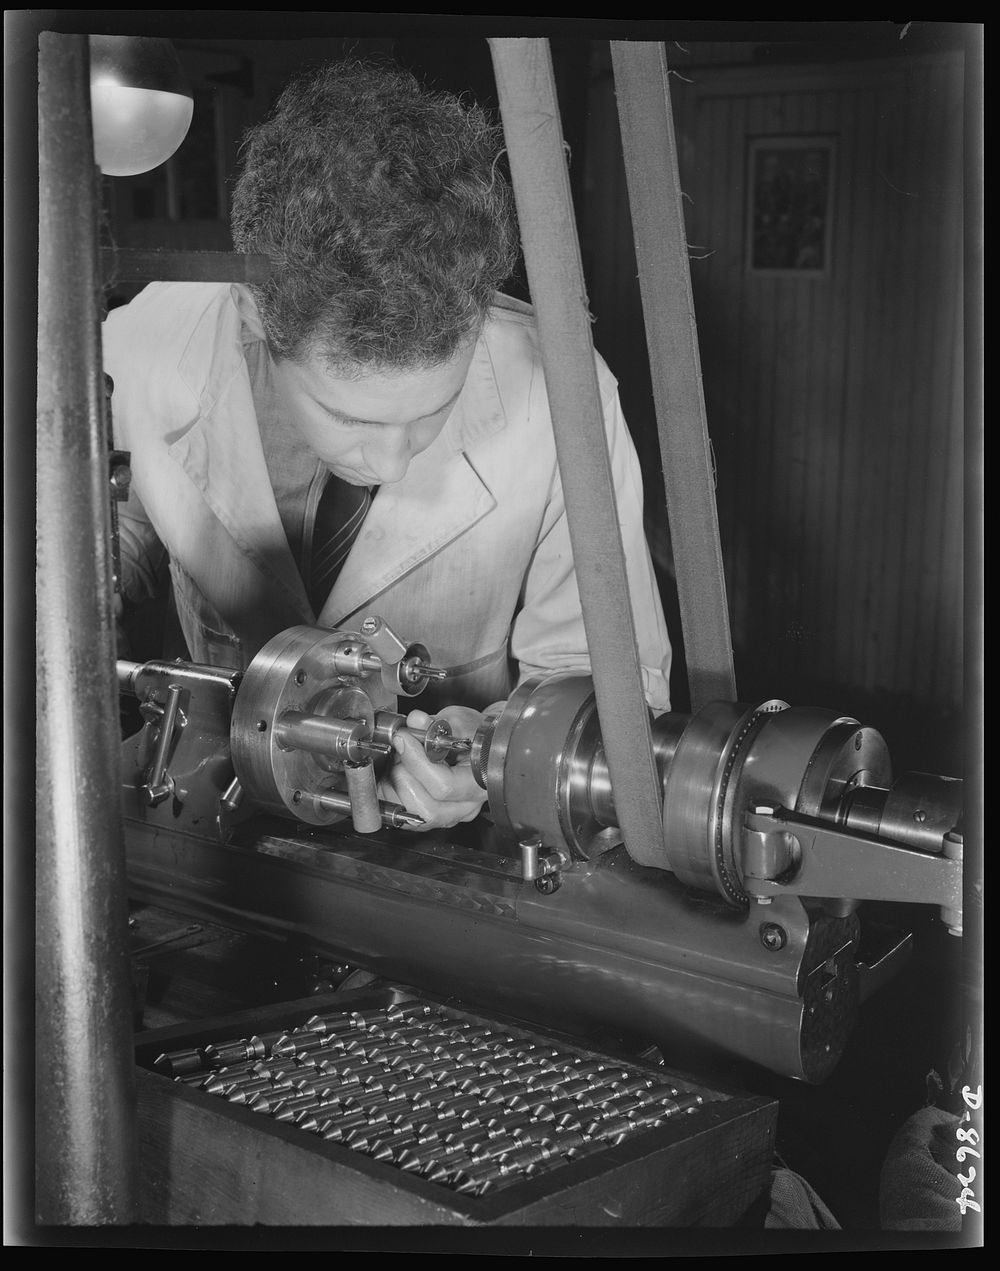 Production. Blood transfusion bottles. In a small plant working under subcontract, John Kerr operates a turret lathe for…